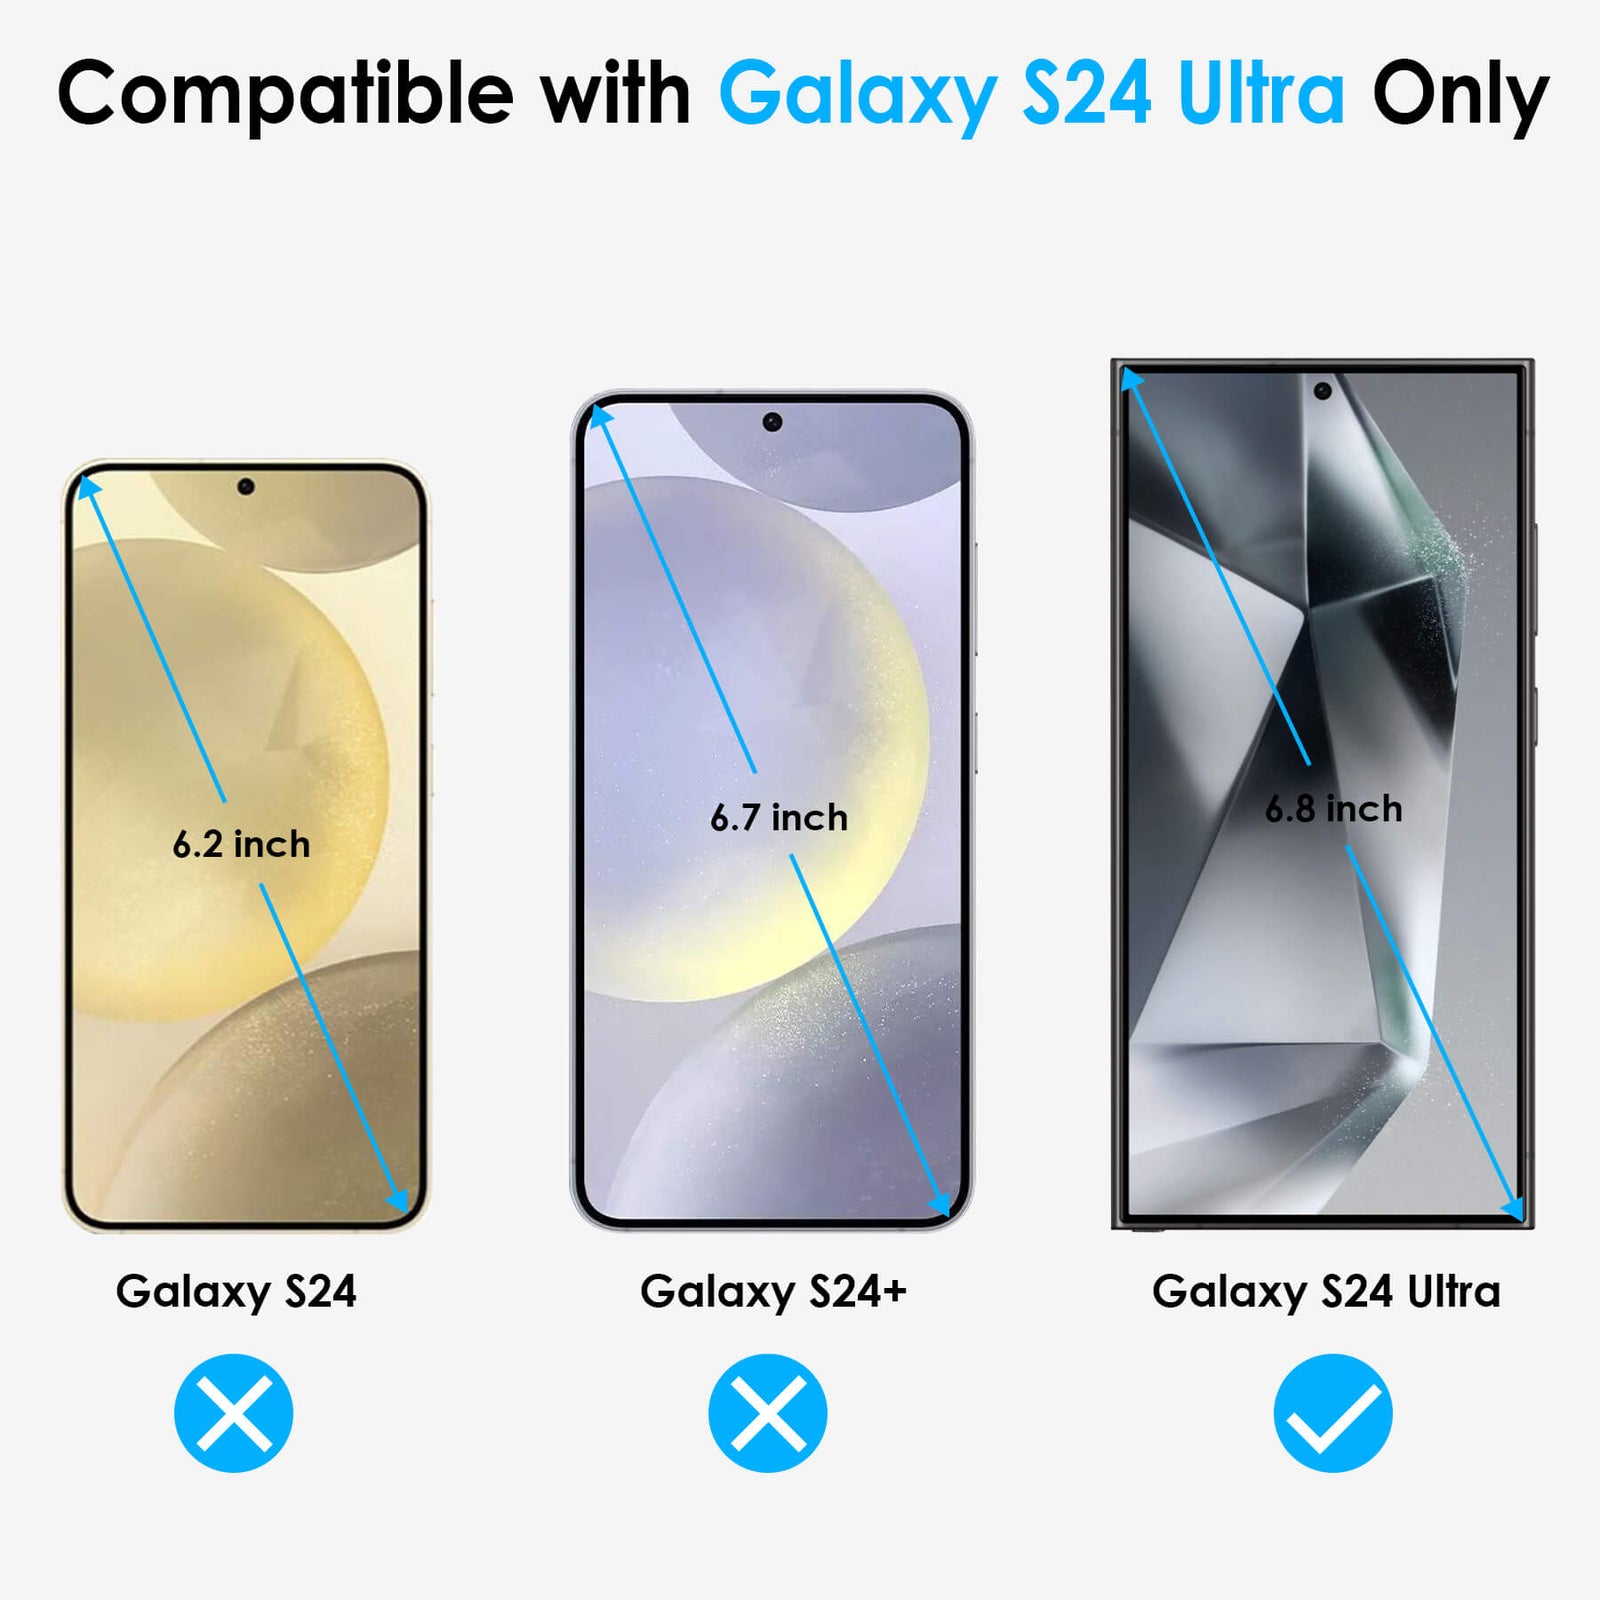 Only compatible with Galaxy S24 Ultra